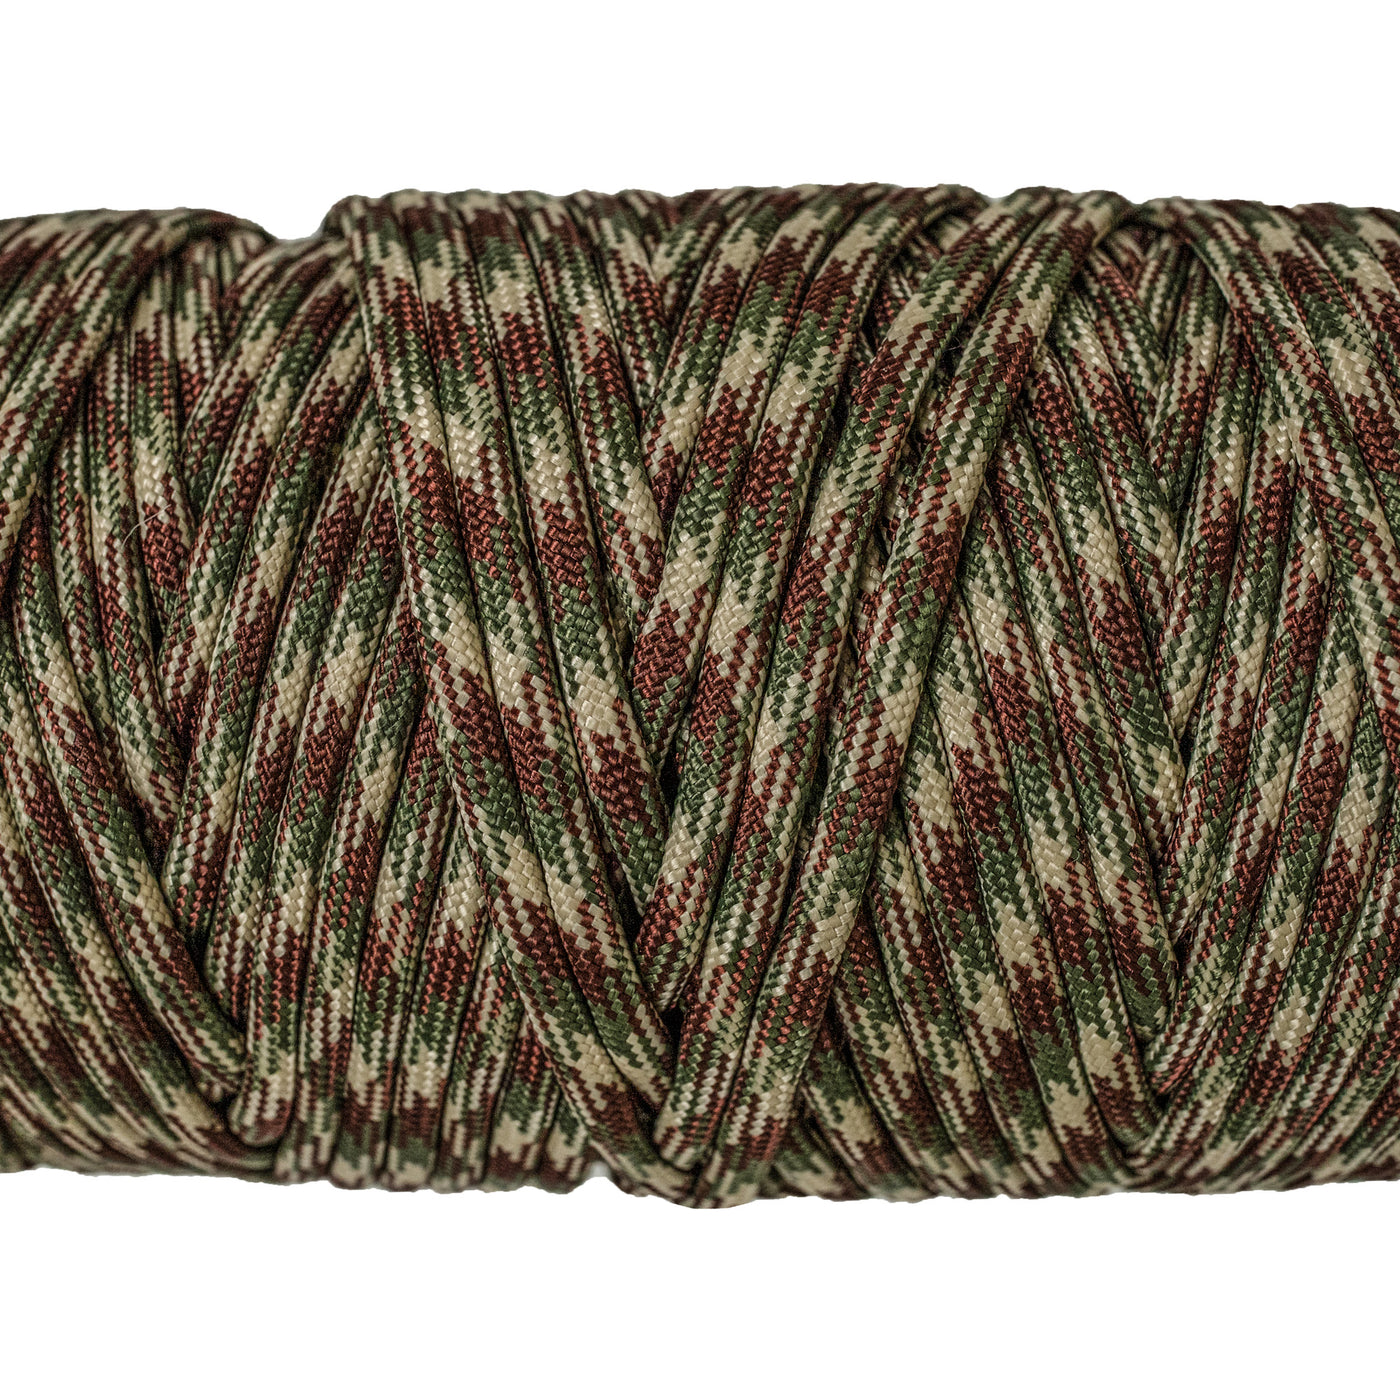 Mossy Oak Paracord Camo Close Up View 200 Foot